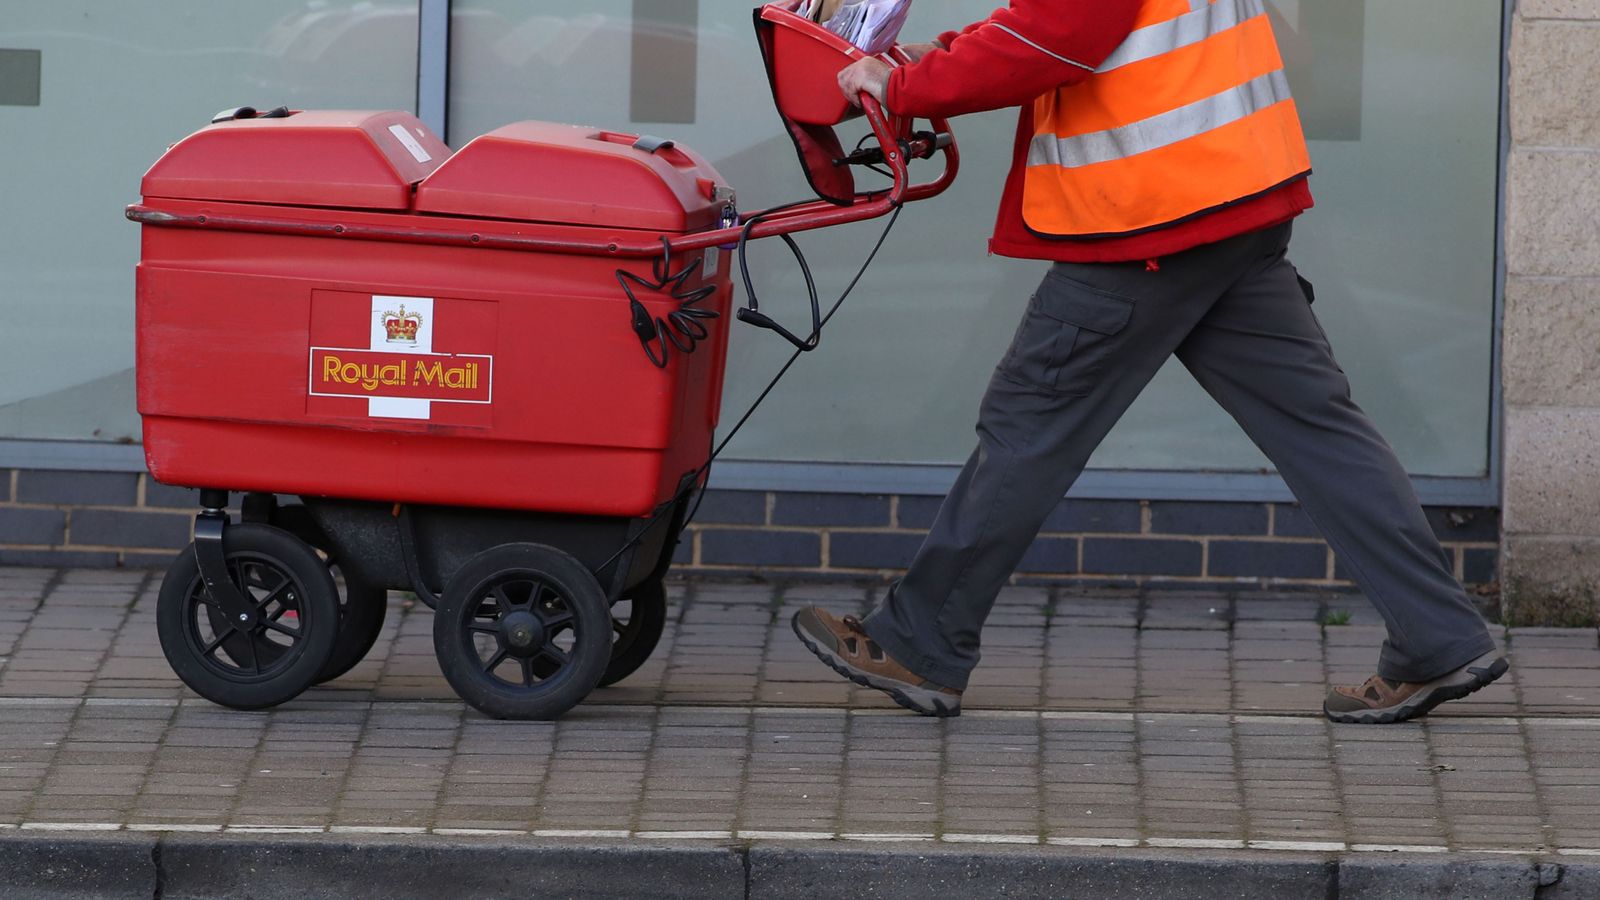 Ofcom investigating Royal Mail failure to deliver post on time